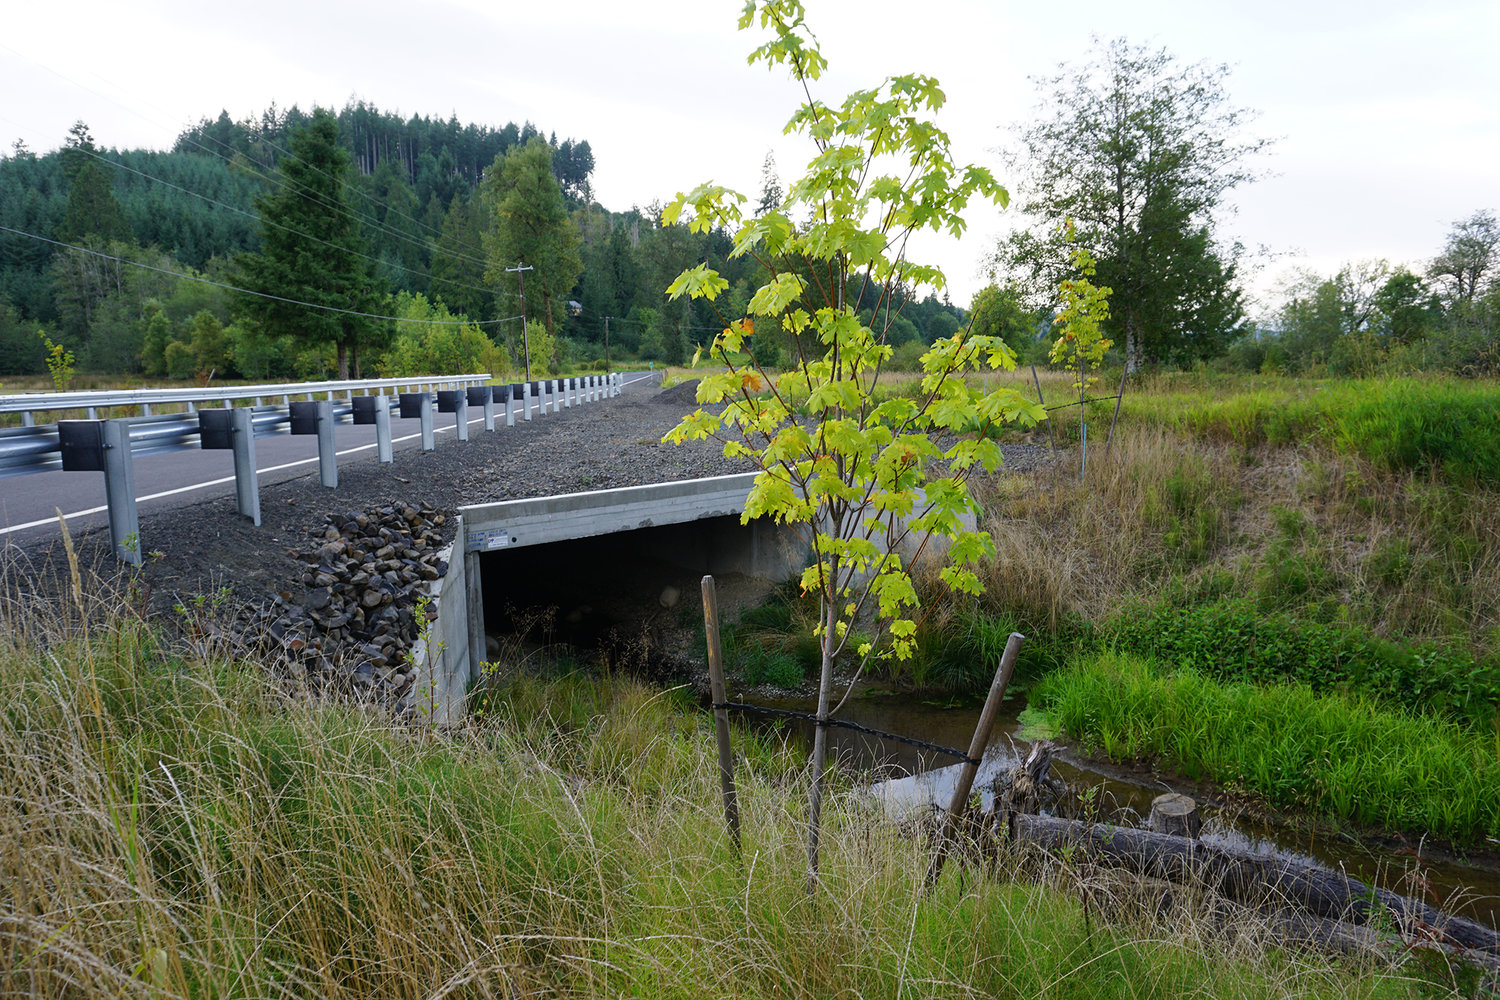 FILE PHOTO — Prairie Creek flows under a new culvert on Bunker Creek Road. The concrete structure replaced a metal pipe that had been obstructing the passage of salmon. The newly planted tree is part of revegetation efforts to improve habitat in the creek.